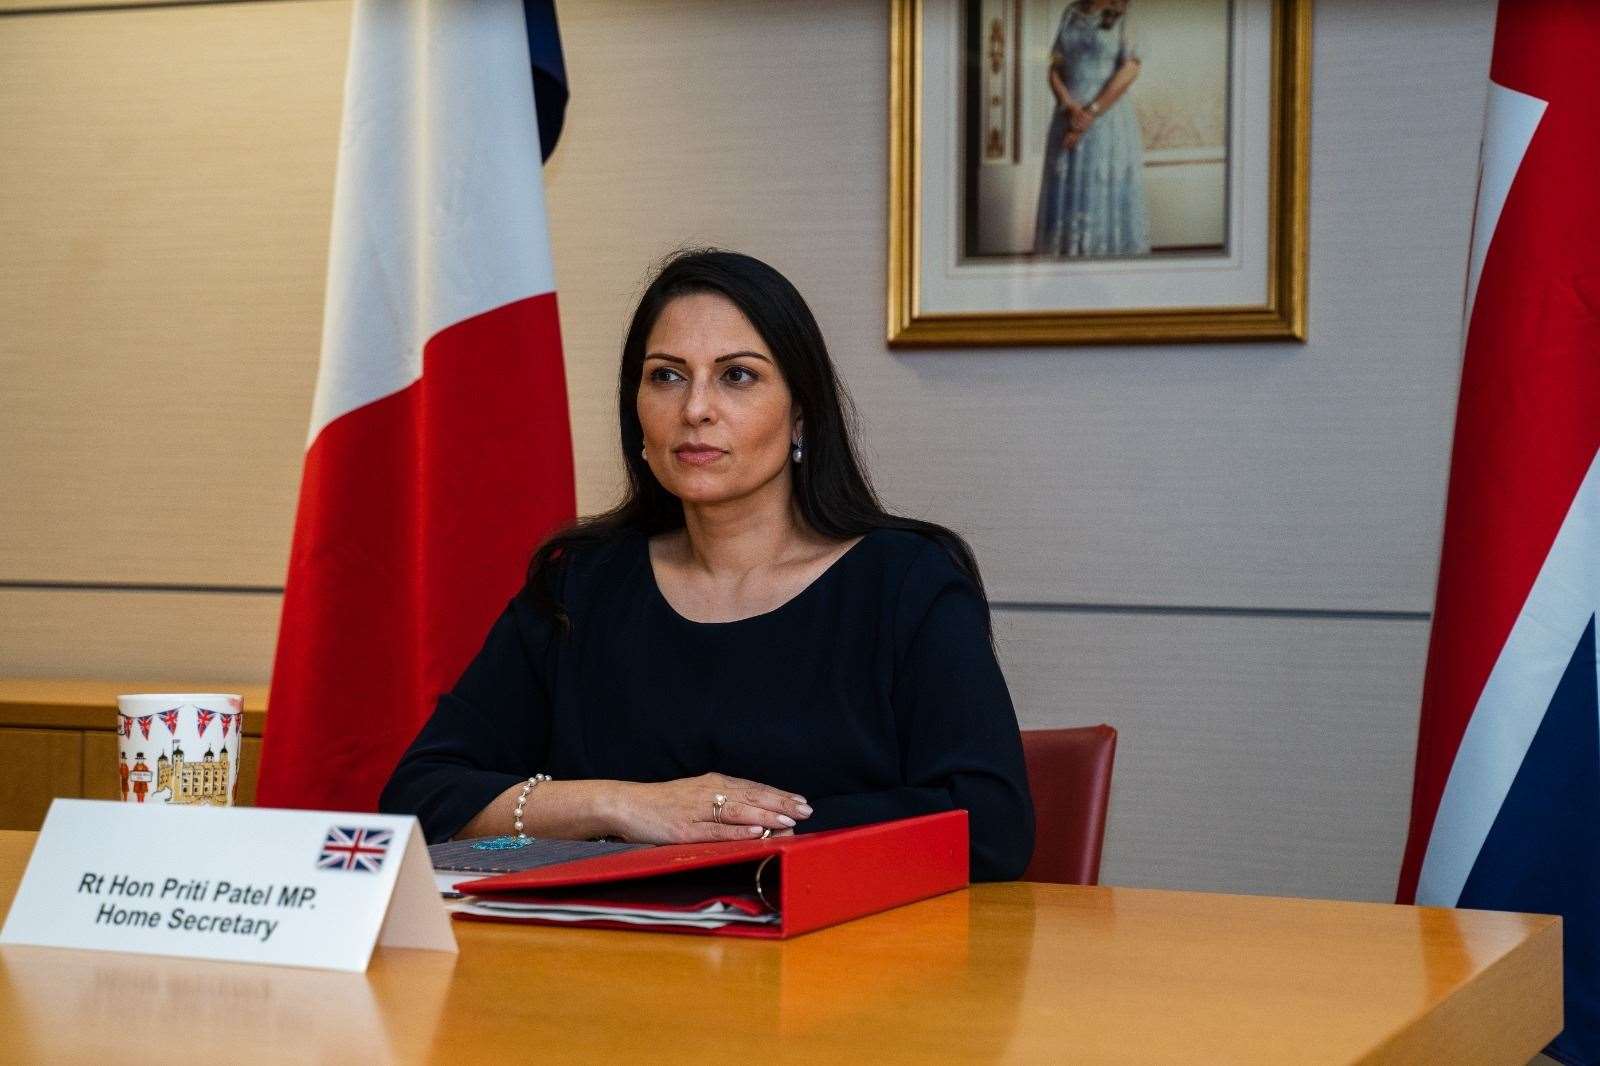 Home secretary Priti Patel (pictured) and the French interior minister, Gérald Darmanin, spoke about small boats crossing the Channel after the tragedy. Picture: Home Office